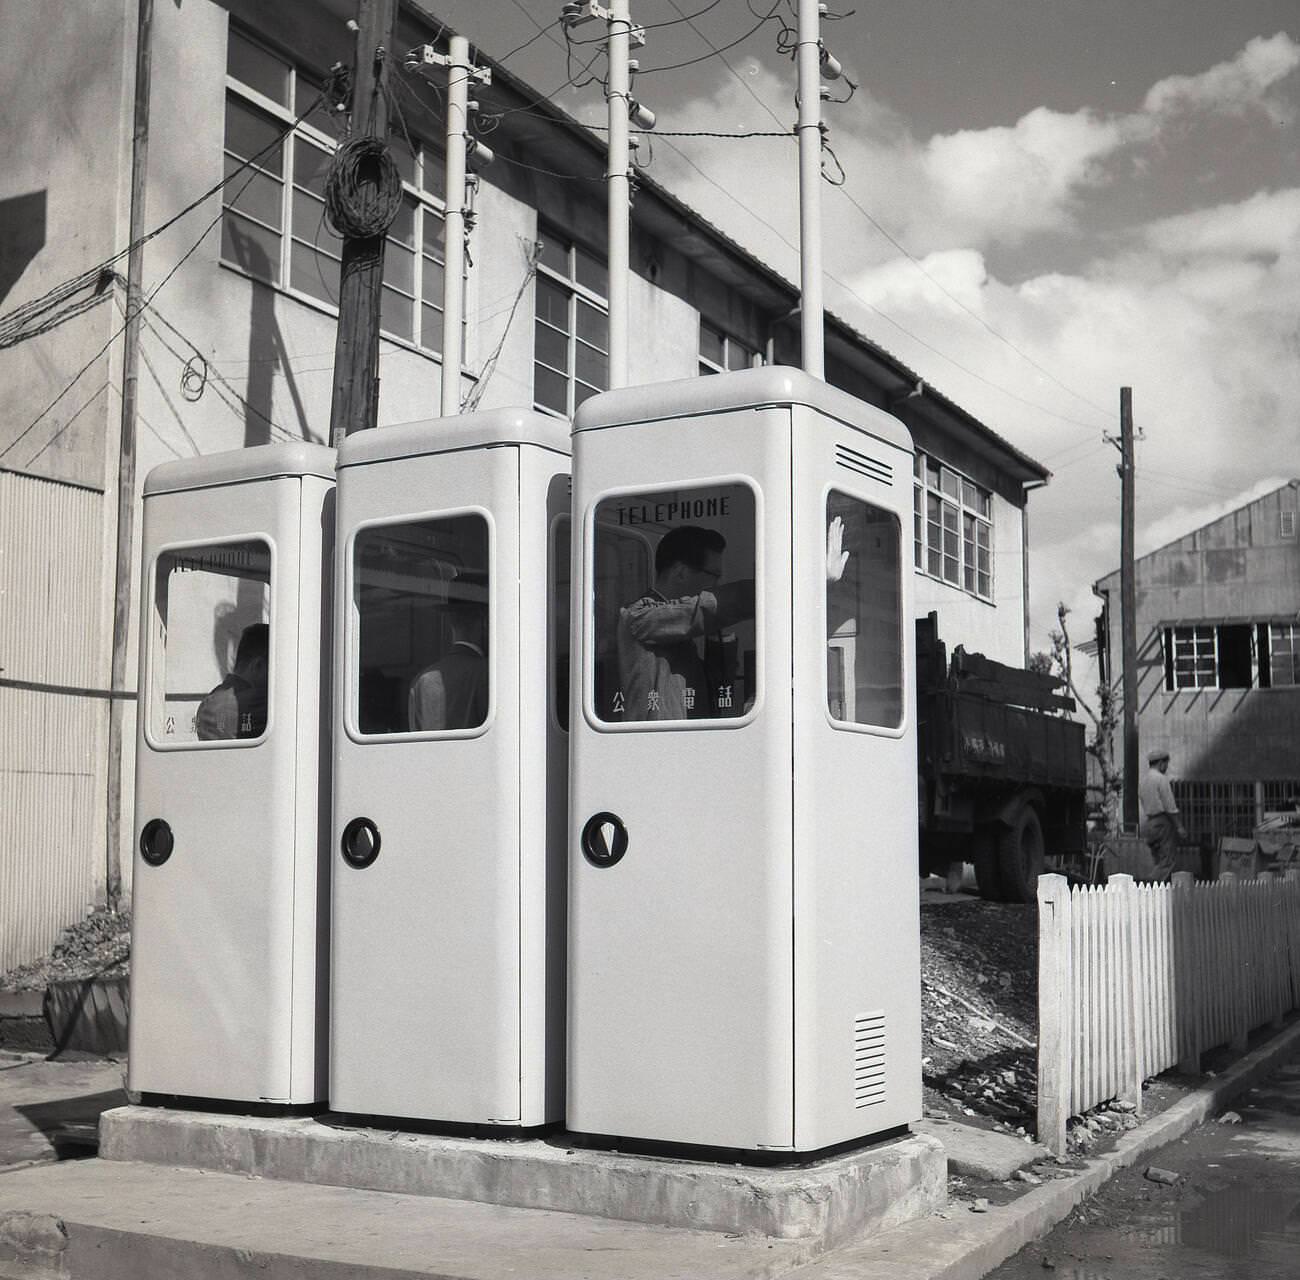 A row of three newly installed public payphones, 1950s.